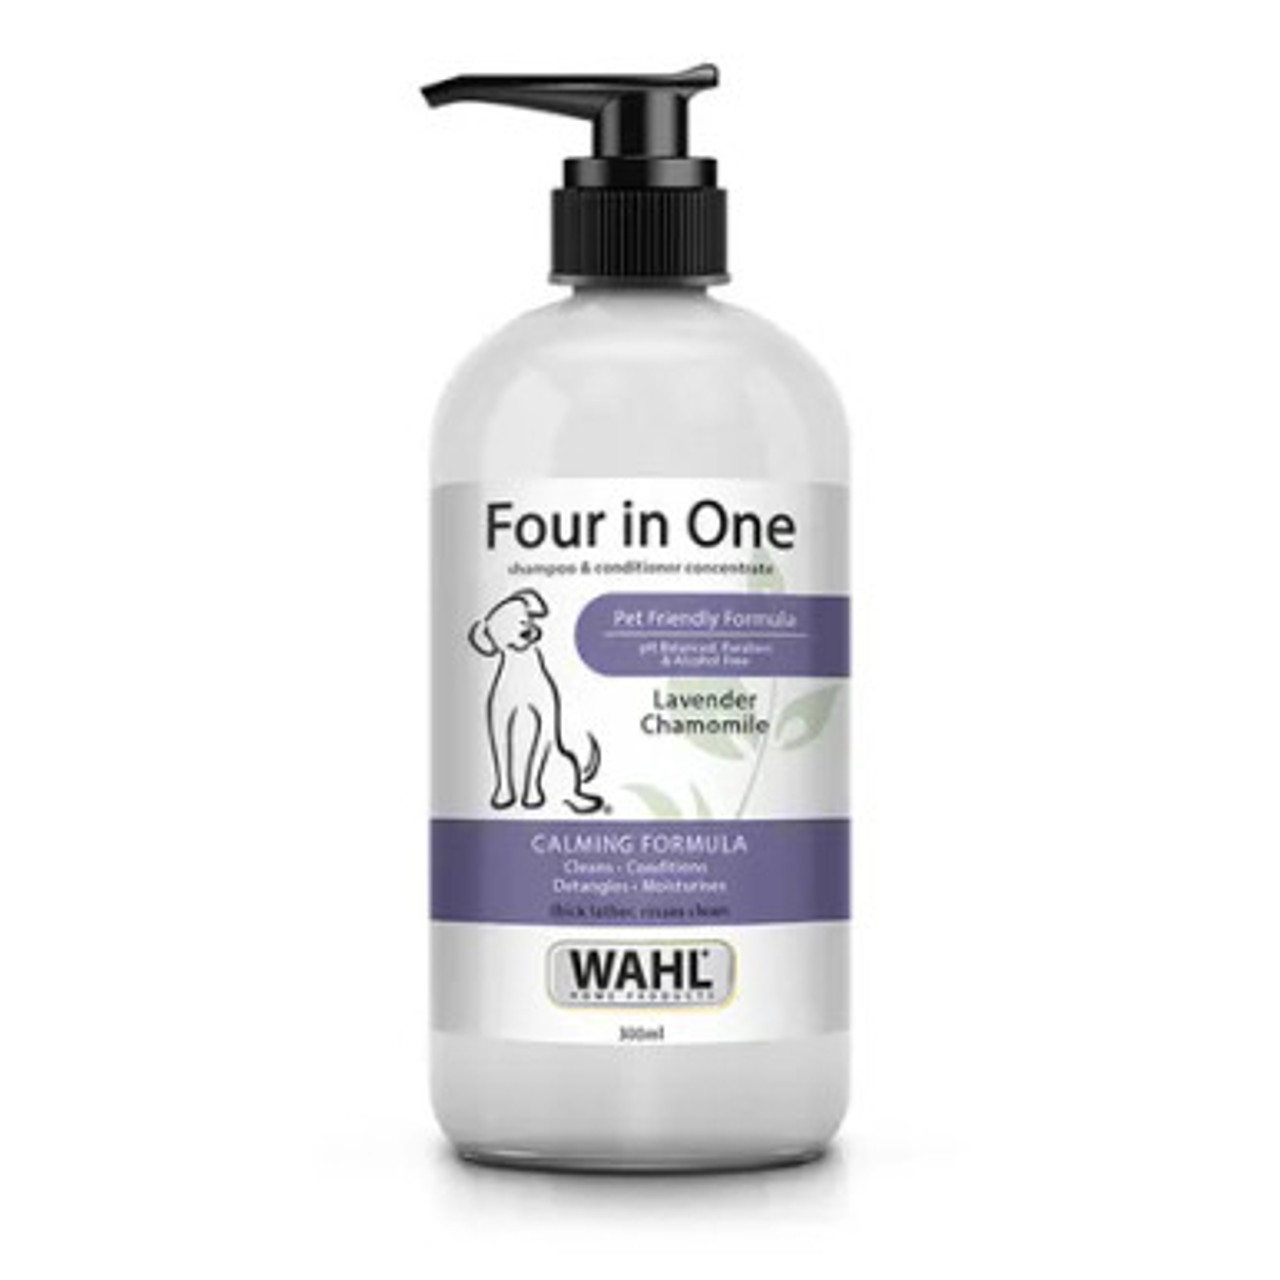 20% Off Wahl 4in1 Shampoo 300ml (10.14 oz) at Atlantic Pet Products